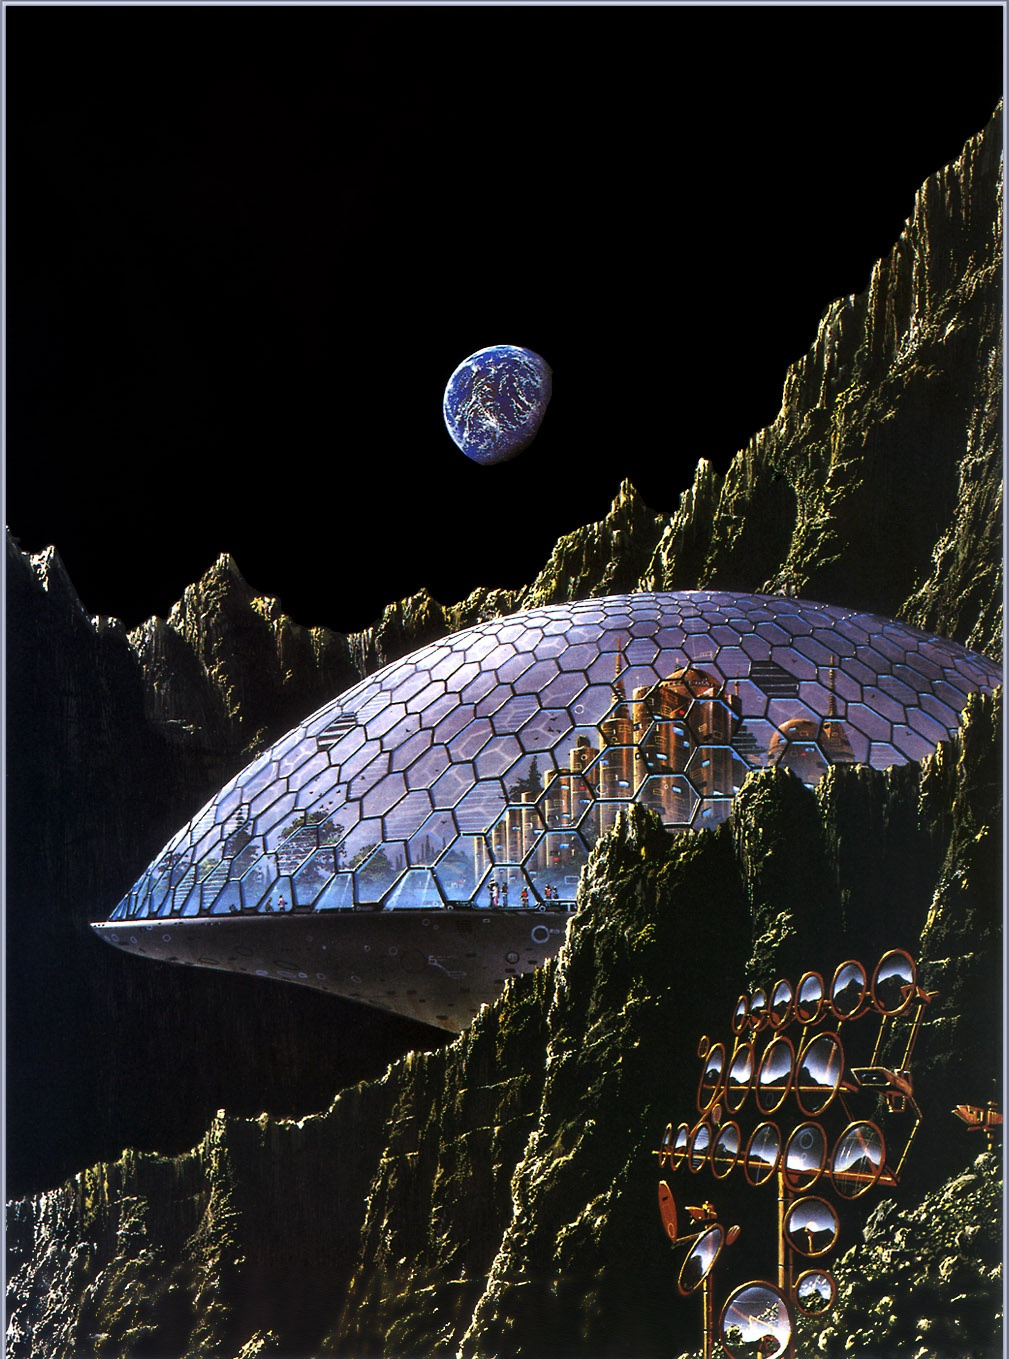 Tim White. Assignment in eternity 1